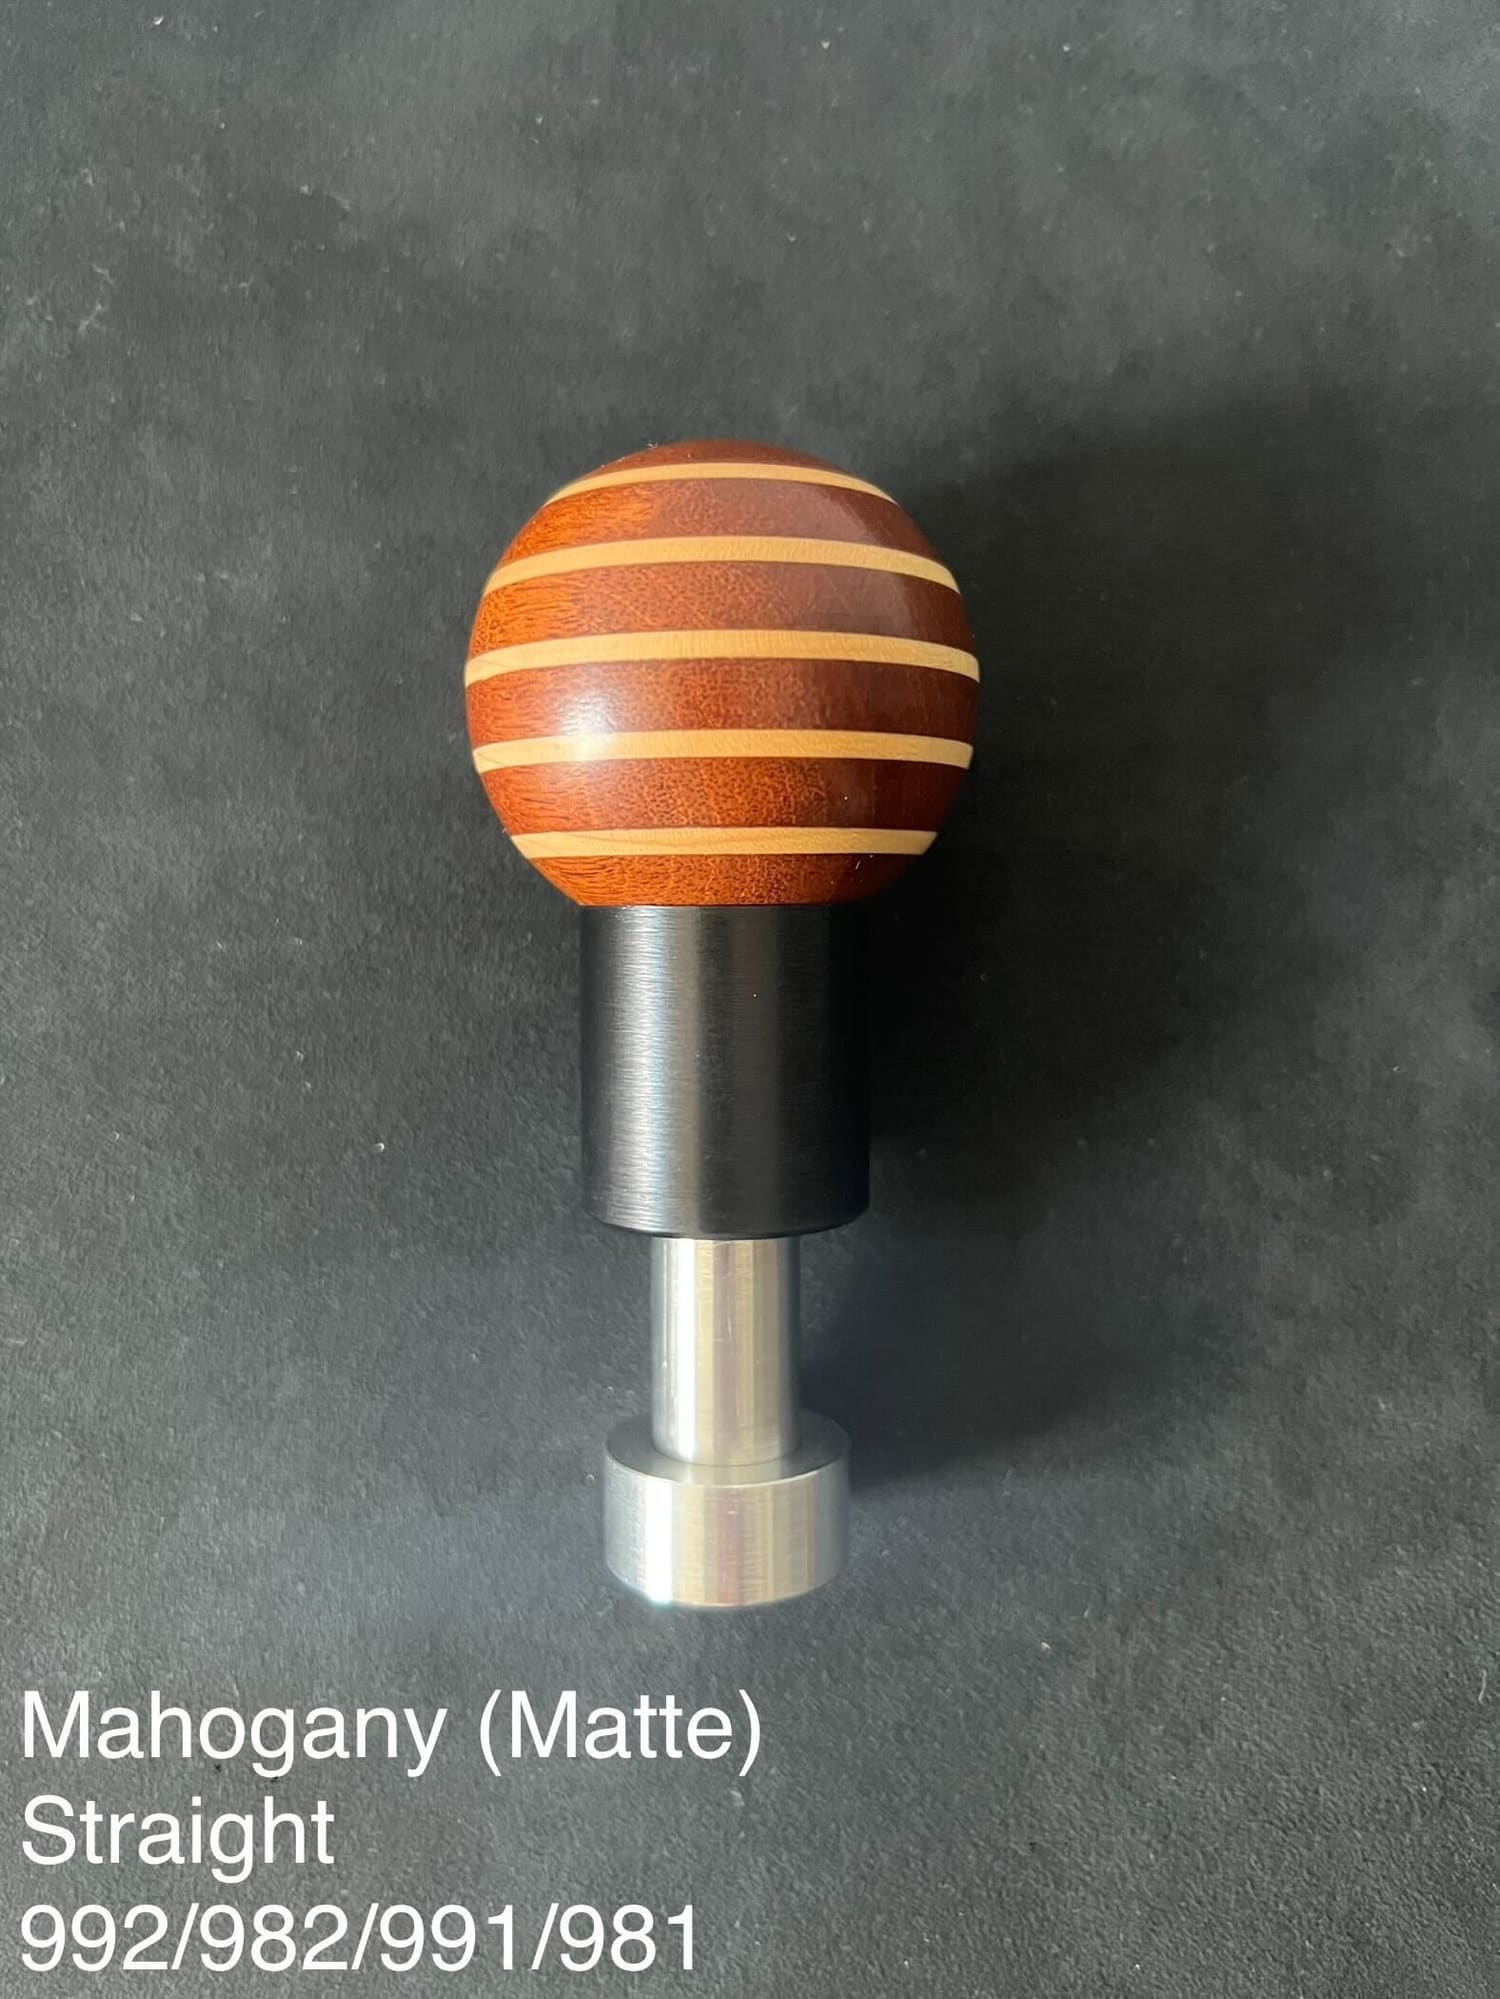 Interior/Upholstery - HERITAGE SHIFT KNOBS - STITCHTOSAMPLE - New - All Years  All Models - All Years  All Models - All Years  All Models - All Years  All Models - All Years  All Models - All Years  All Models - All Years  All Models - All Years  All Models - Brooklyn, NY 11225, United States